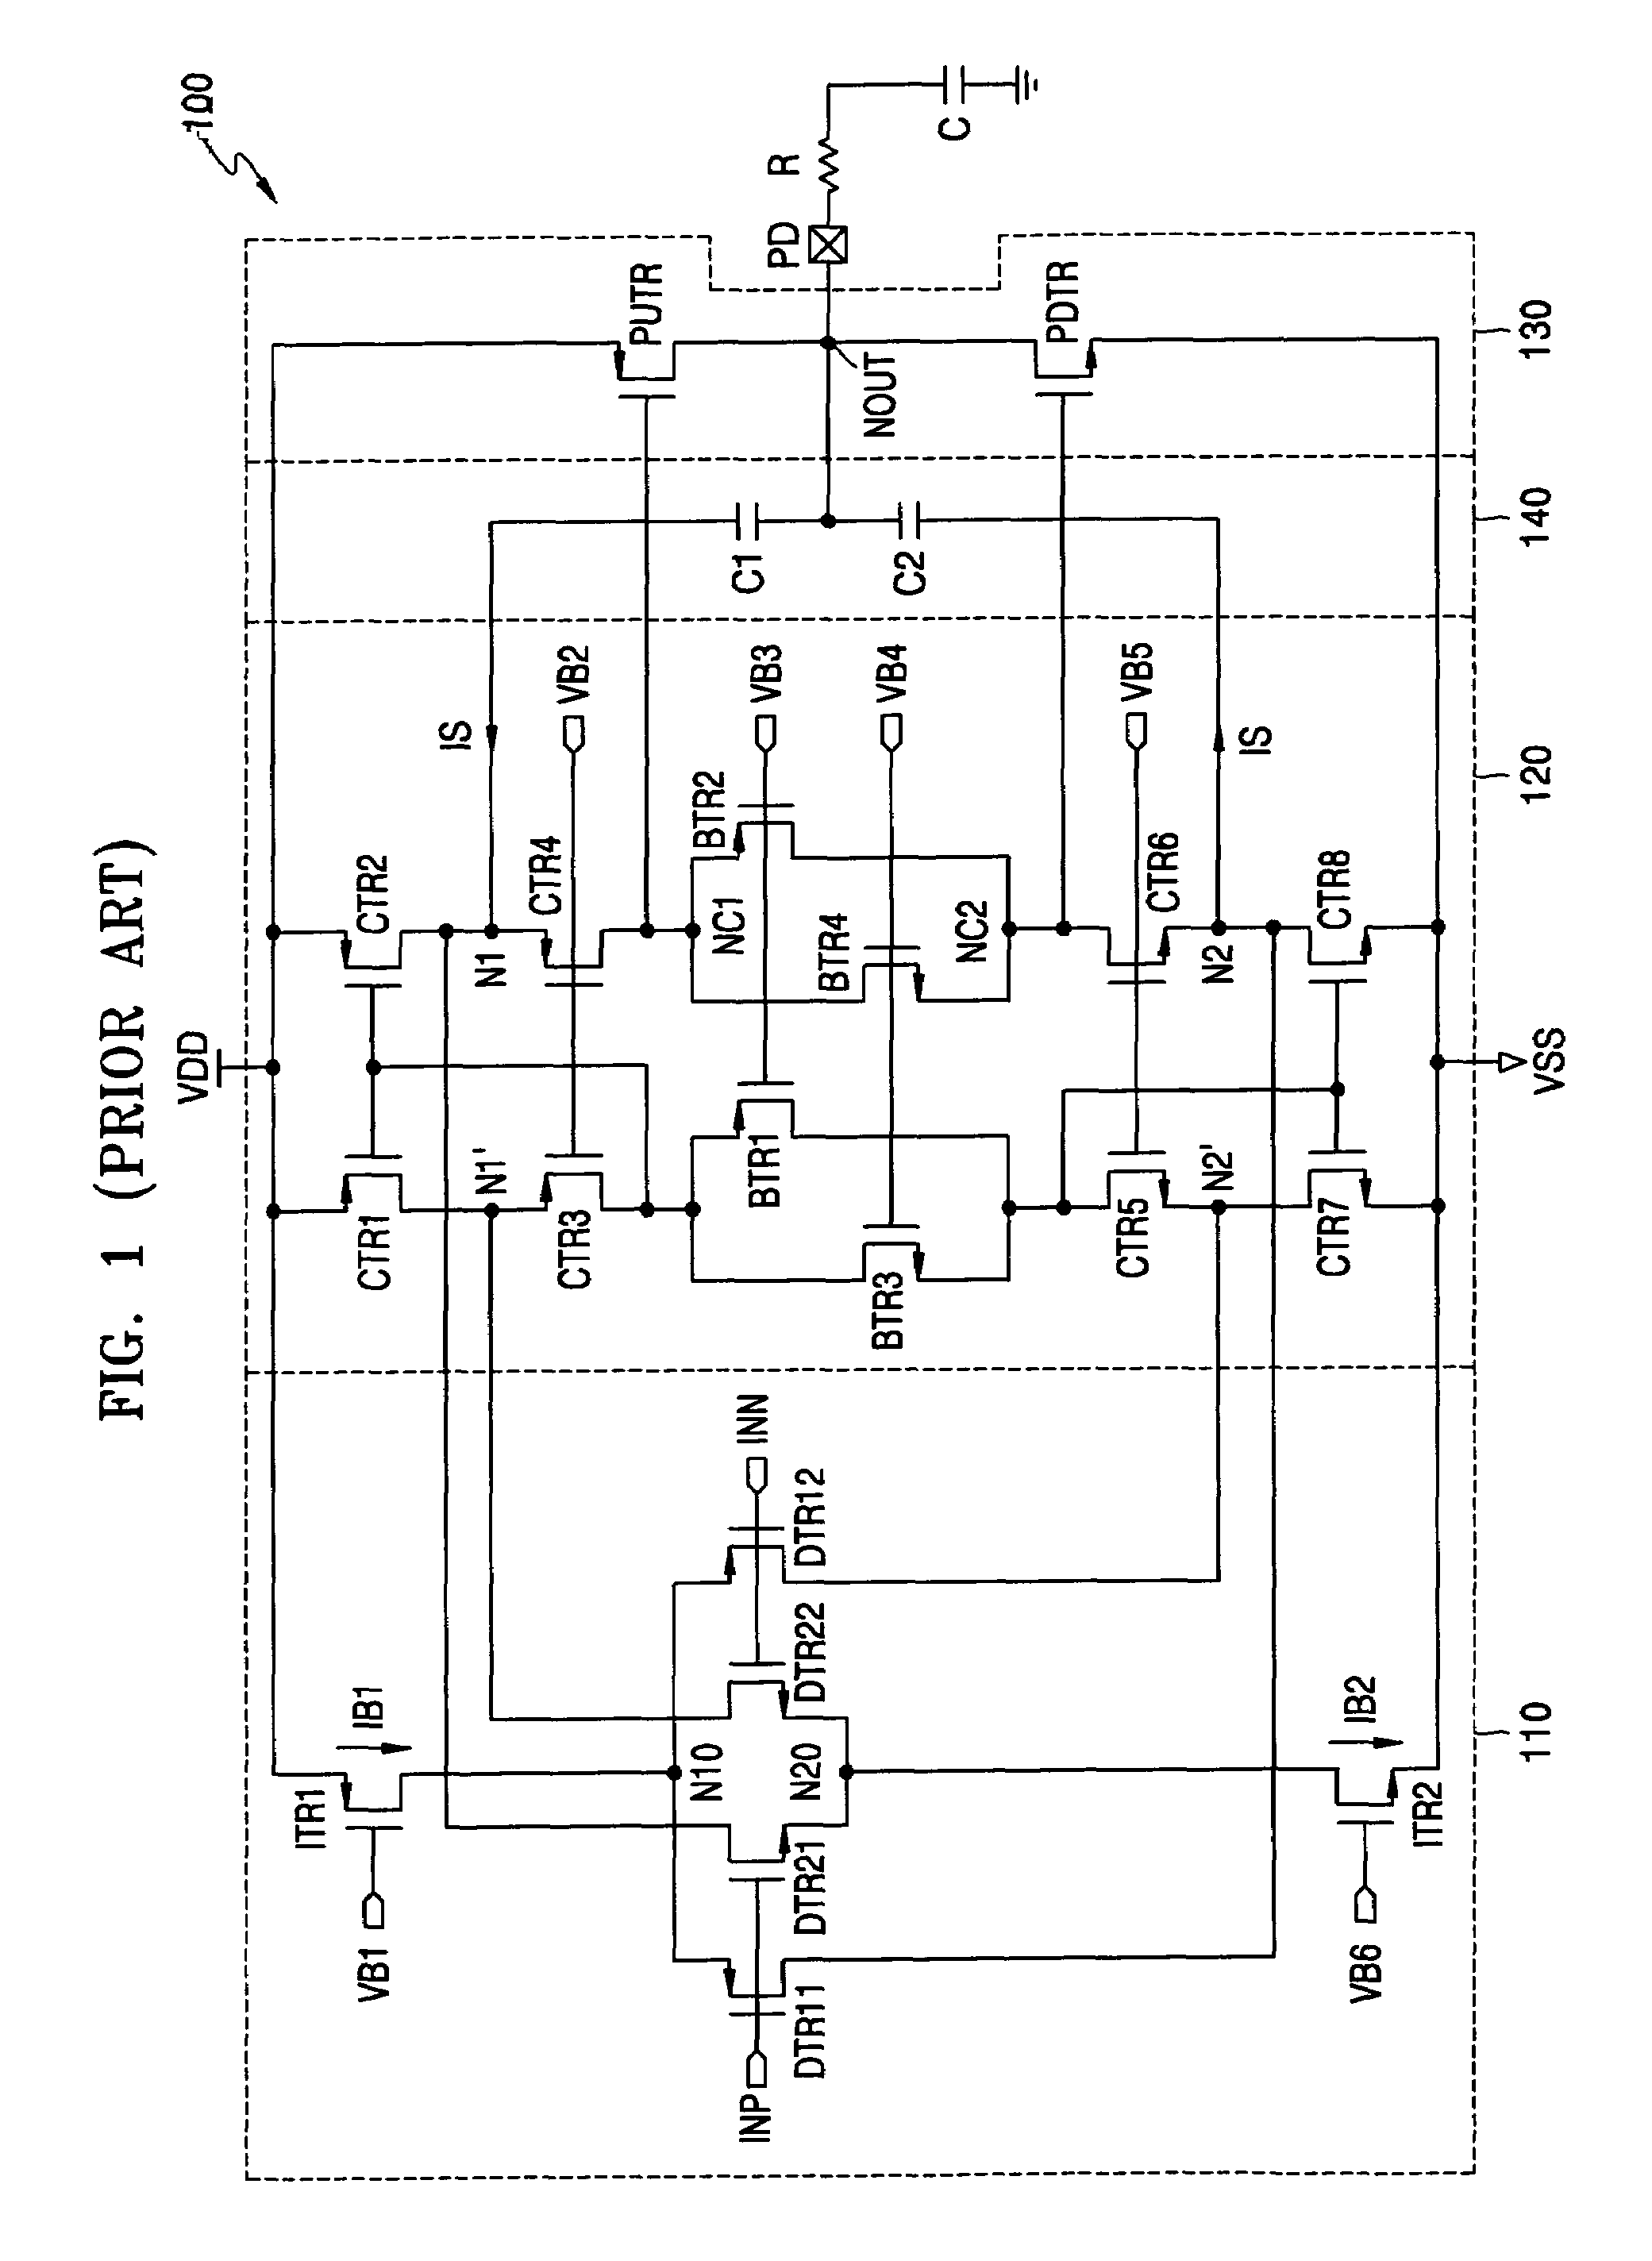 Circuits and methods for improving slew rate of differential amplifiers